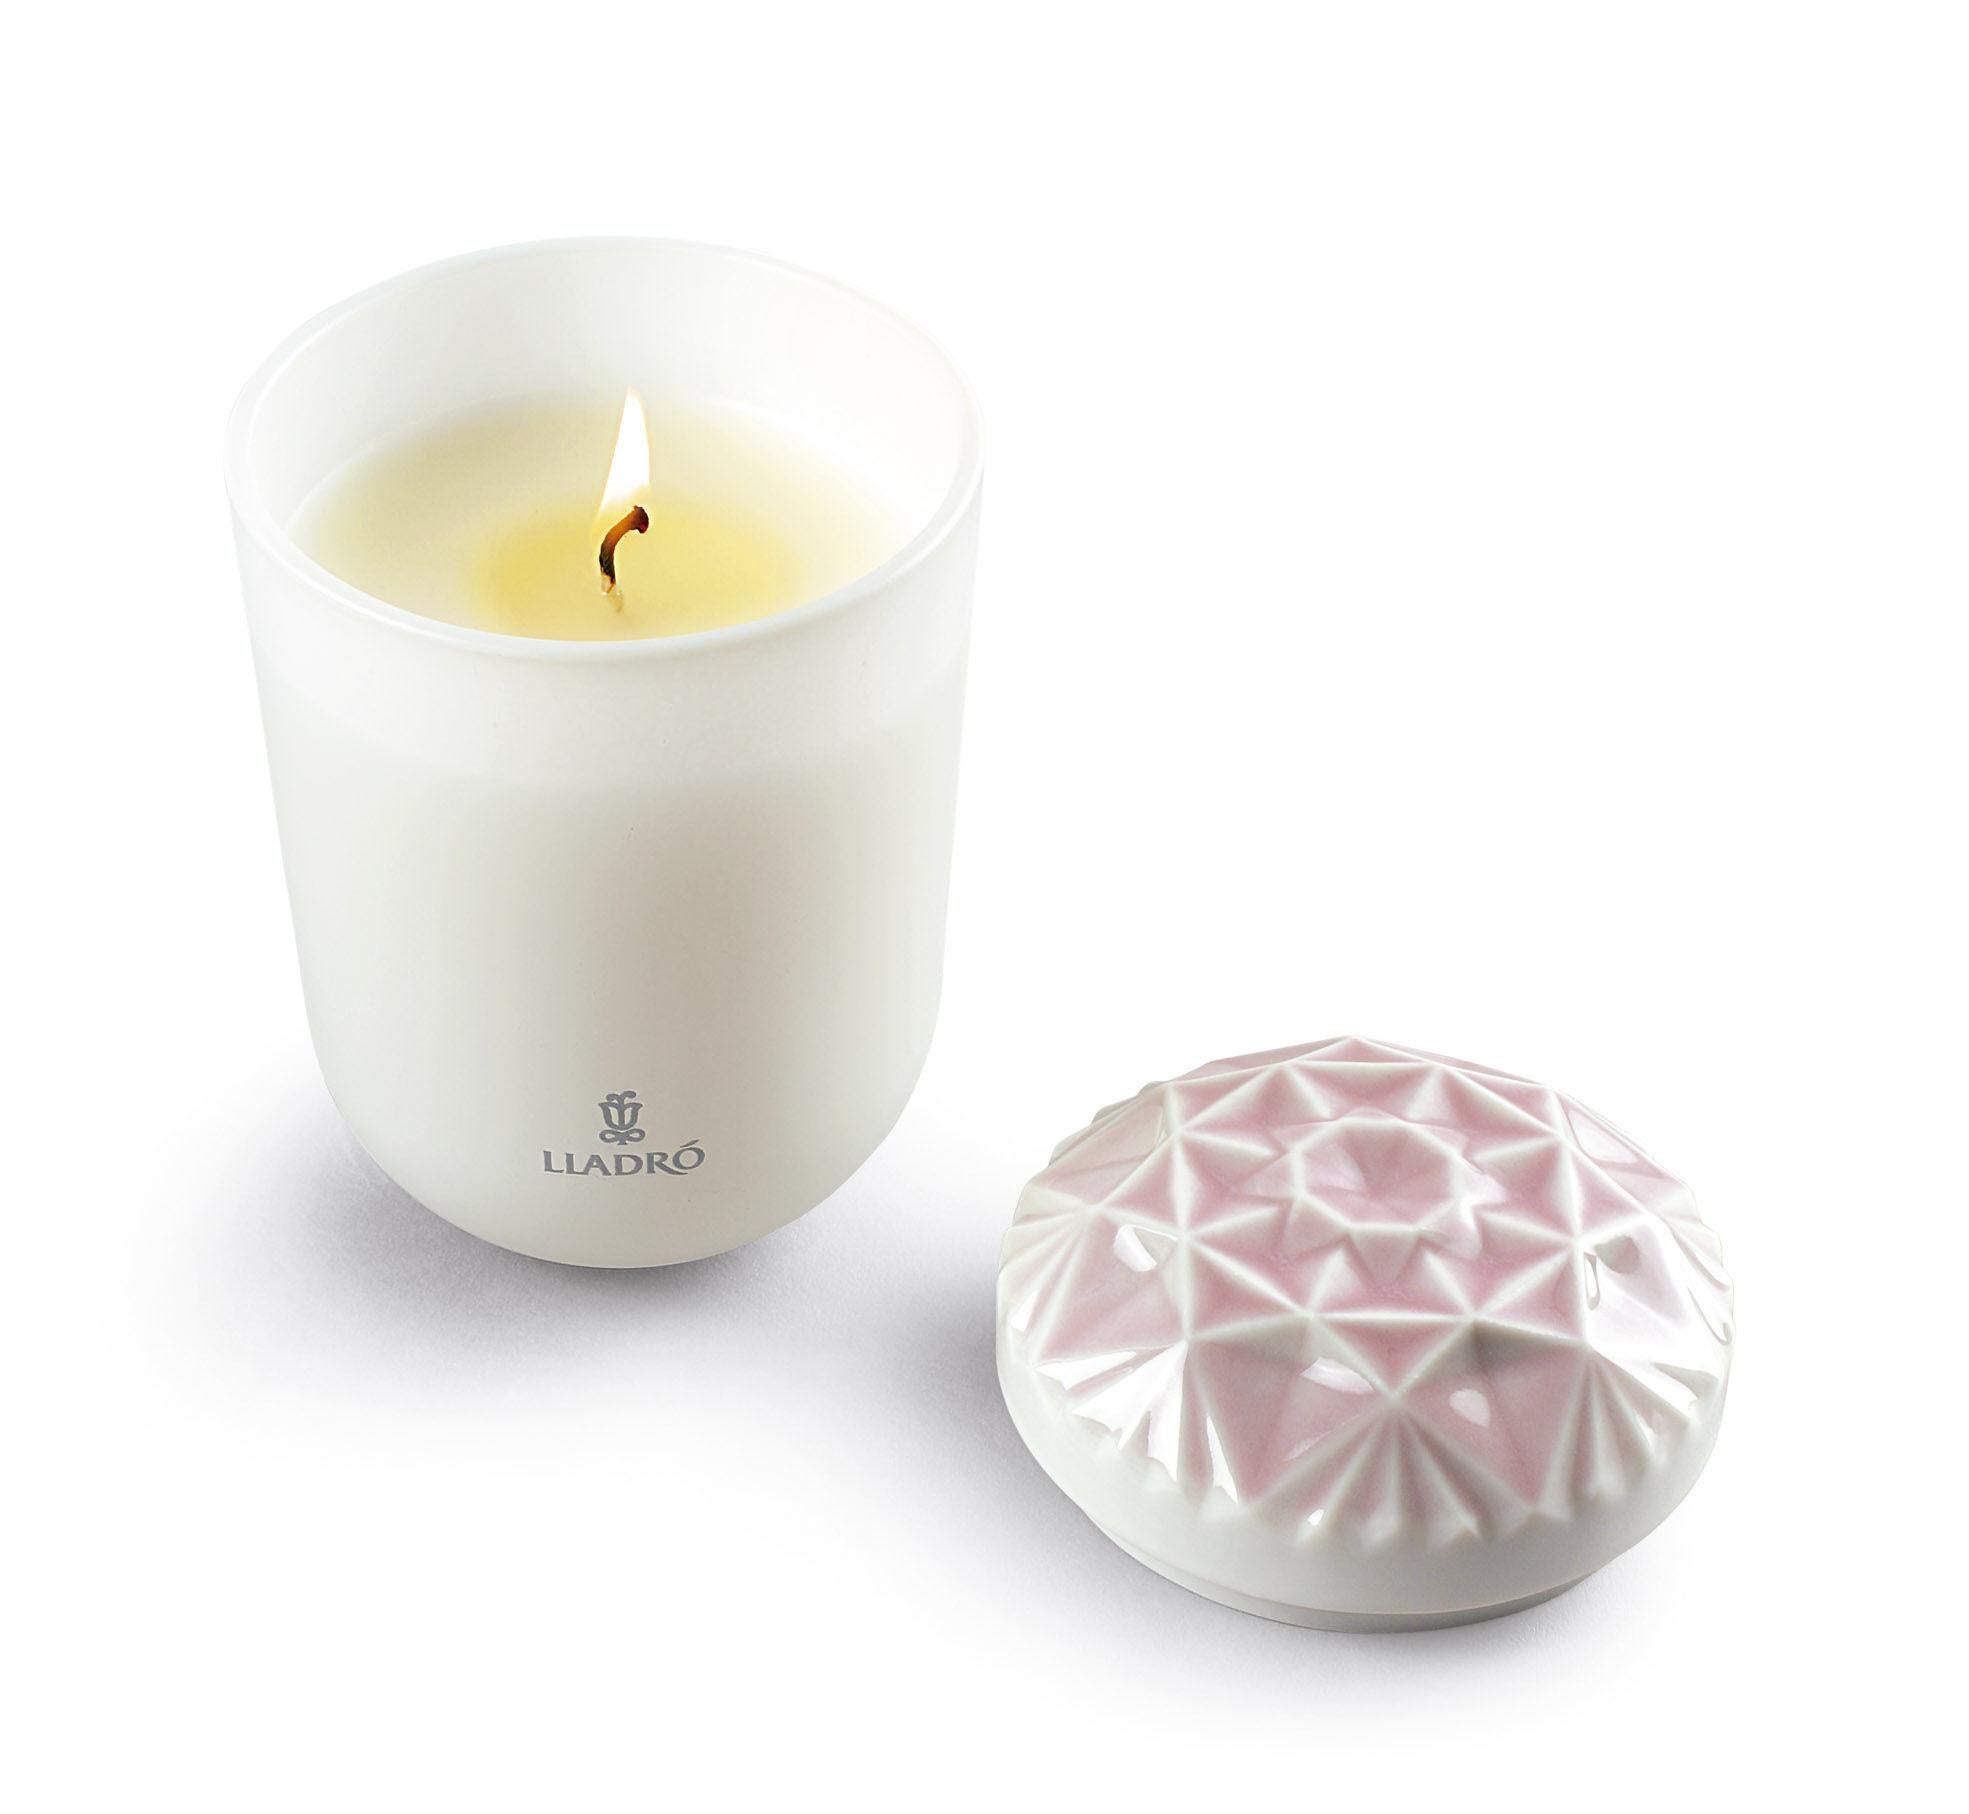 Echoes of Nature Candle I Love You, Mom Scent
In stock in Los Angeles

Home candle in Matte white porcelain with a floral scent and an elaborate porcelain lid, hand engraved and painted that is a metaphor for the fragrance it treasures.

The